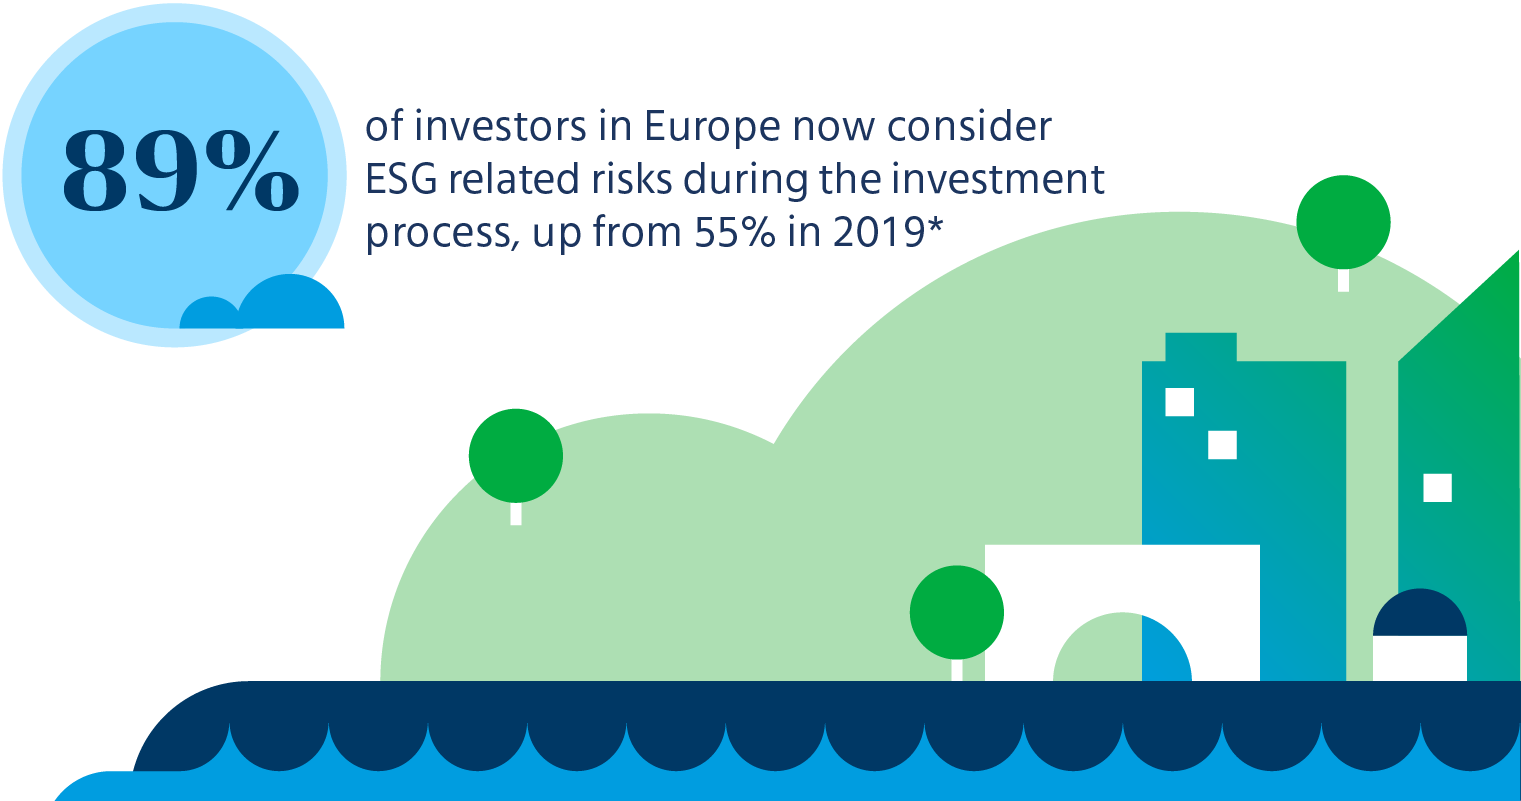 89 percent of investors in Europe now consider ESG related risks during the investment process, up from 55 percent in 2019